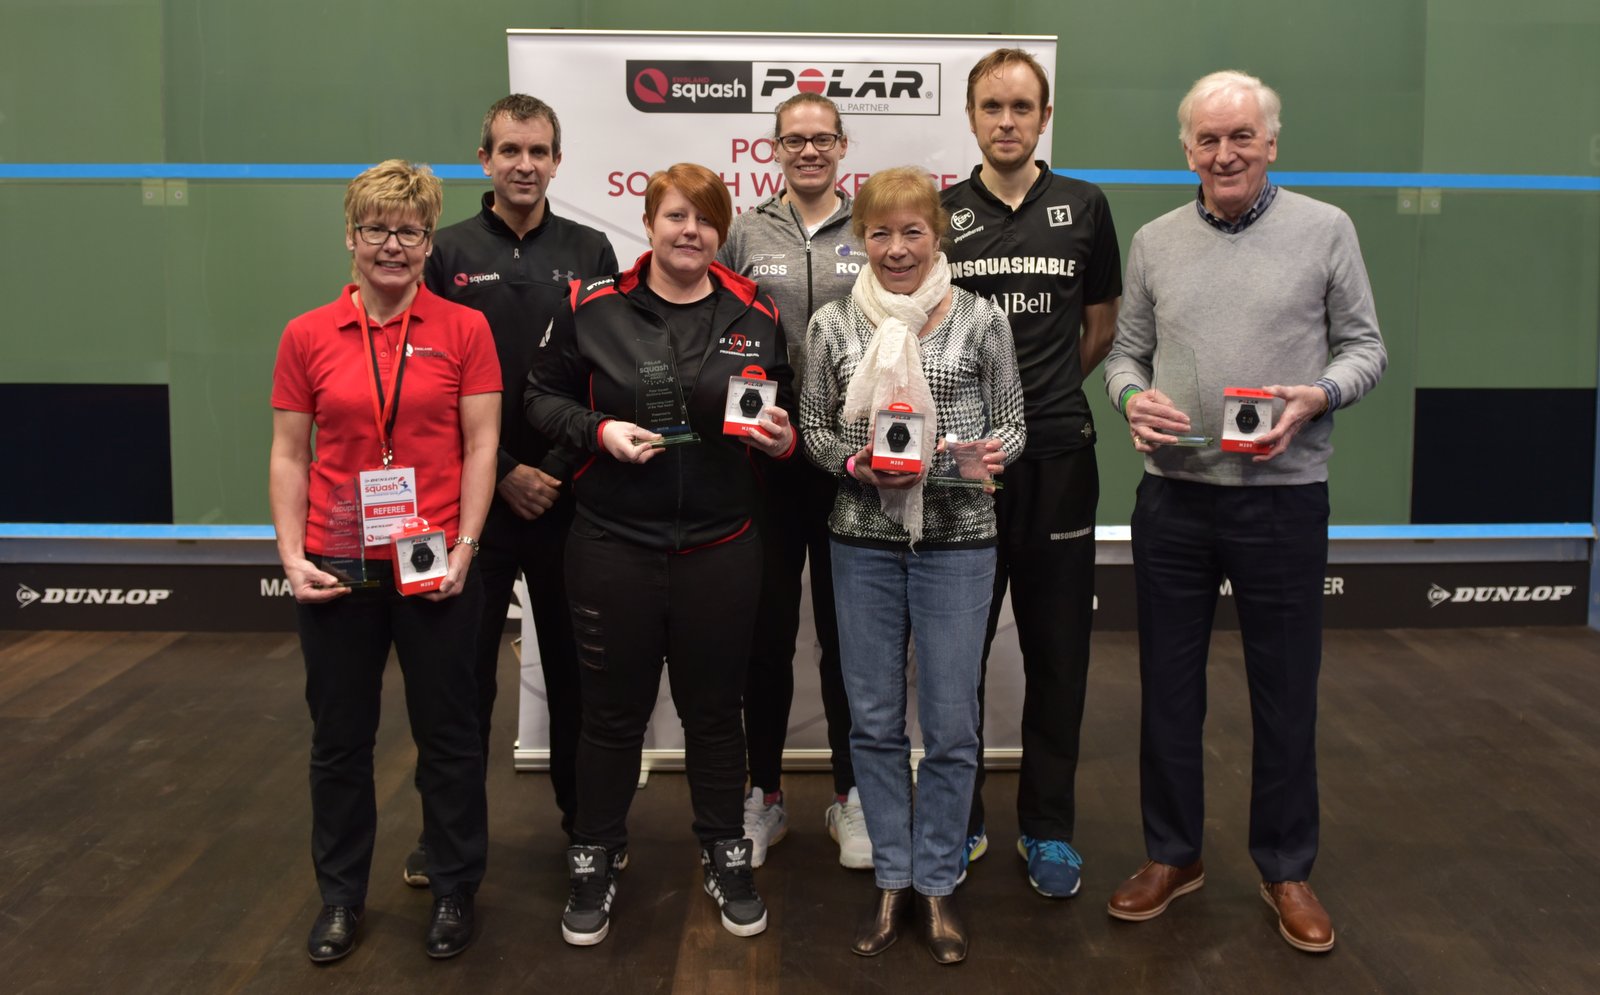 Group photo of the 2018 Polar Squash Workforce Award winners with the players who presented their prizes.